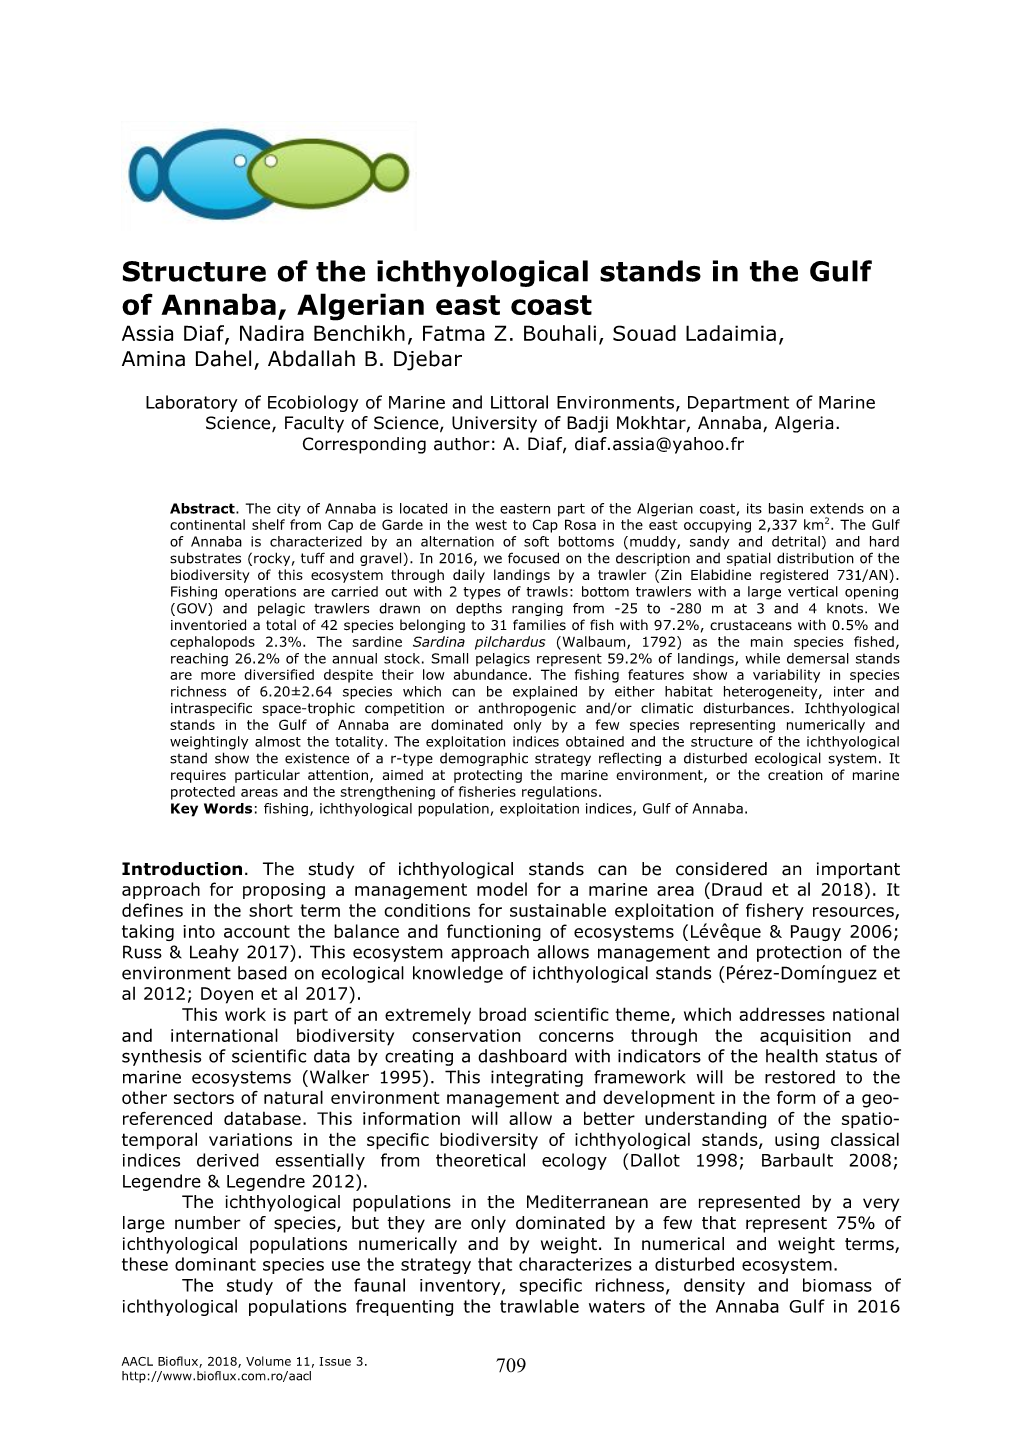 Structure of the Ichthyological Stands in the Gulf of Annaba, Algerian East Coast Assia Diaf, Nadira Benchikh, Fatma Z